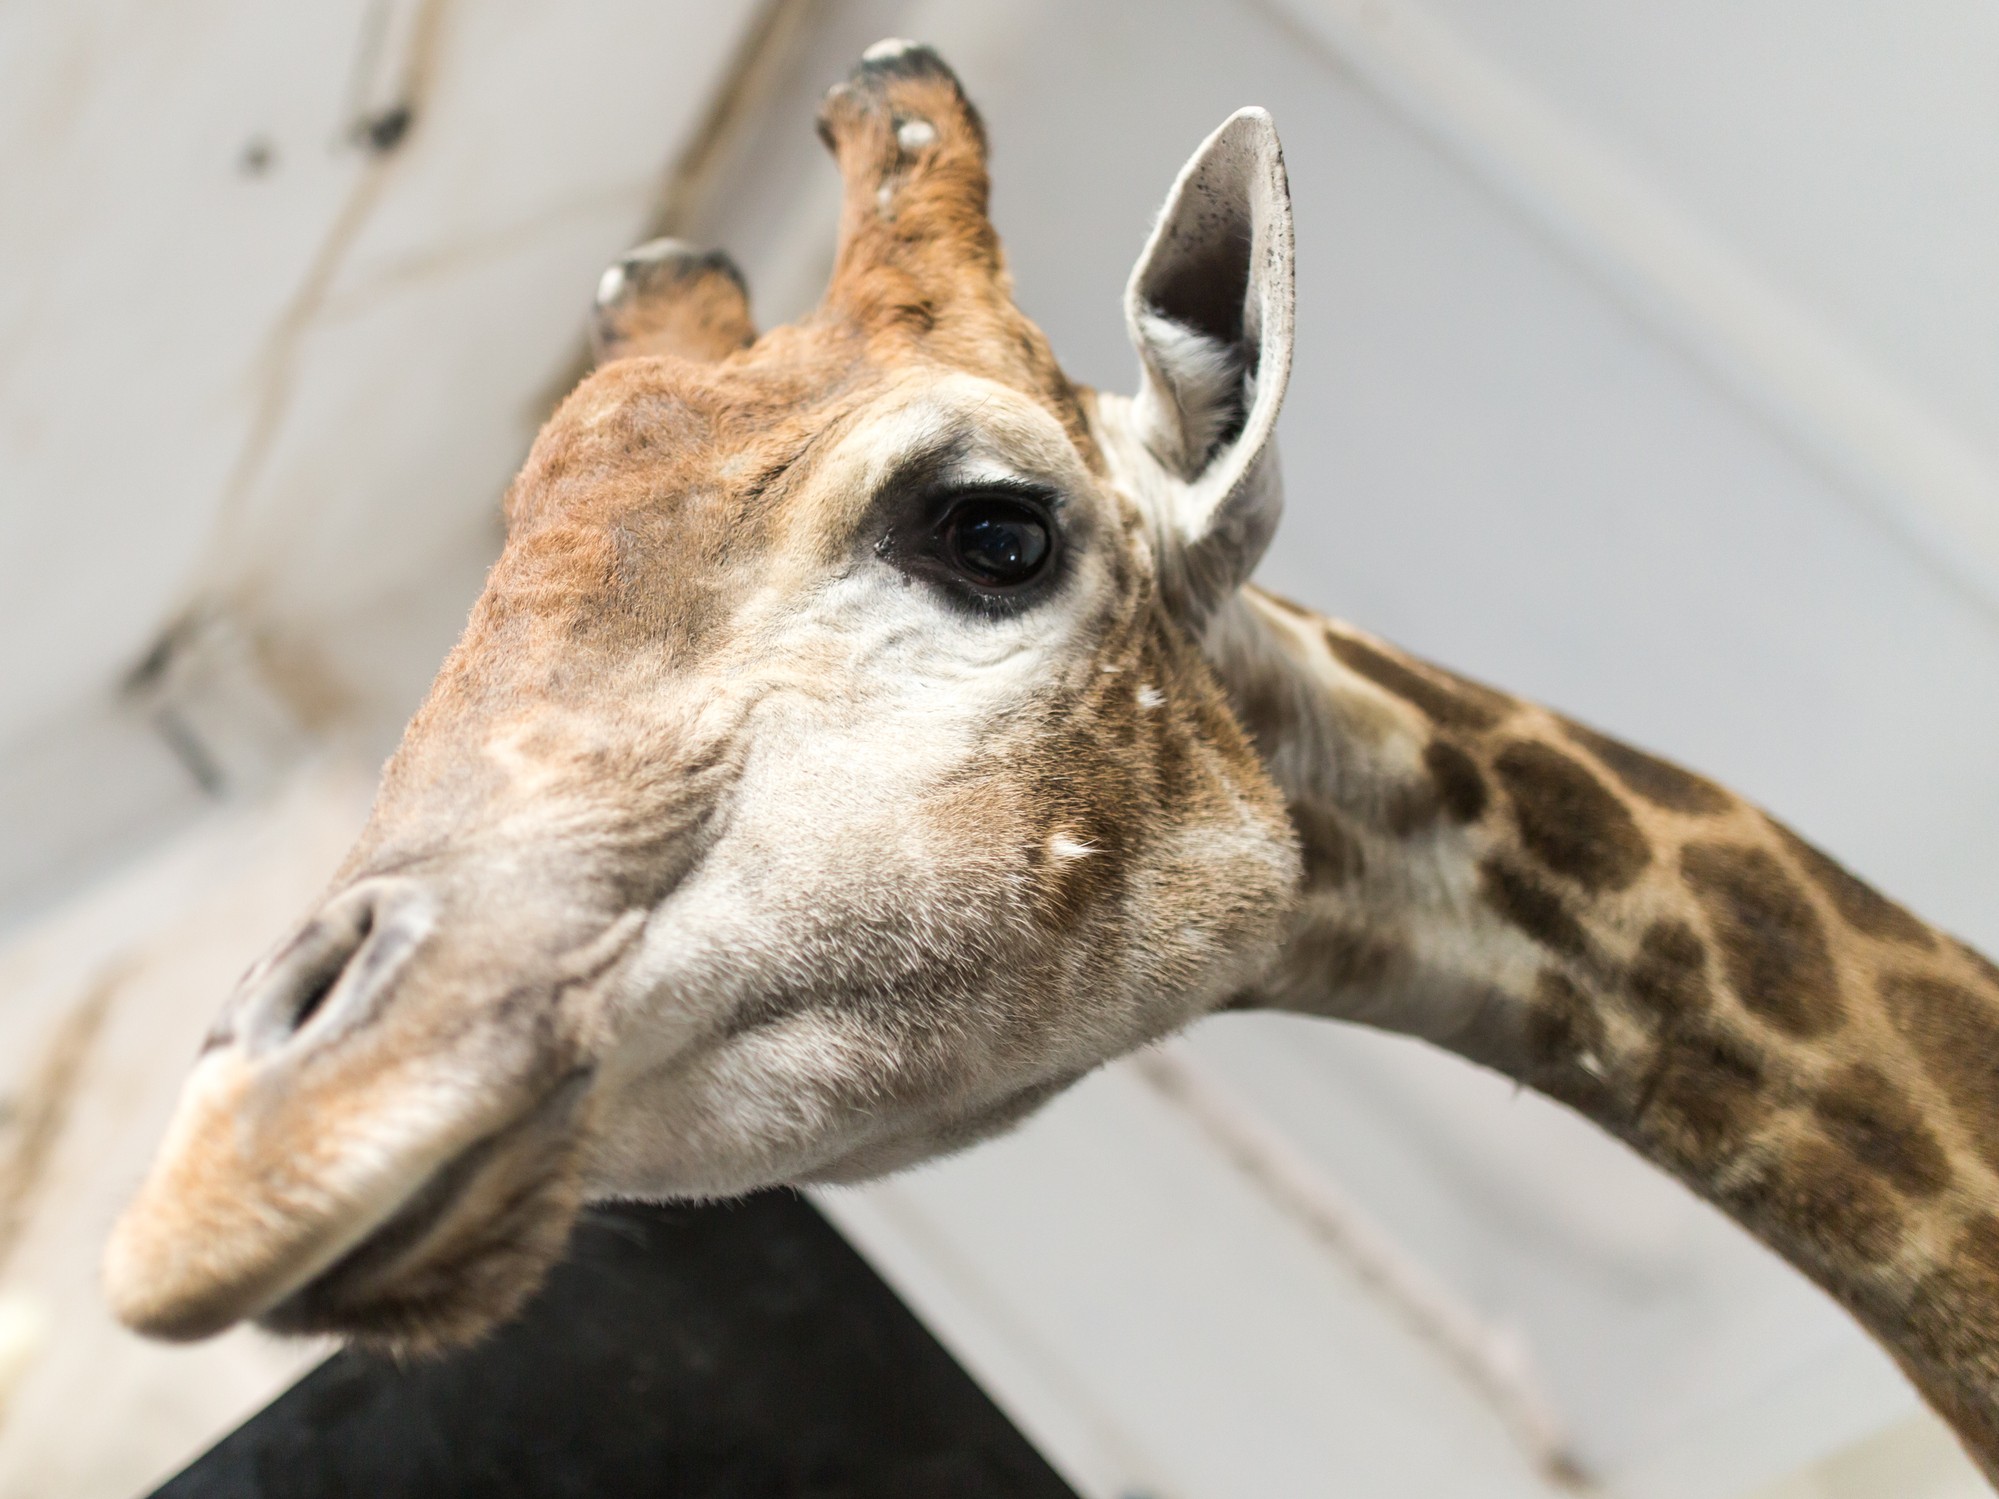 Giraffes have been added to the list of animals banned on the Hamptons Subway